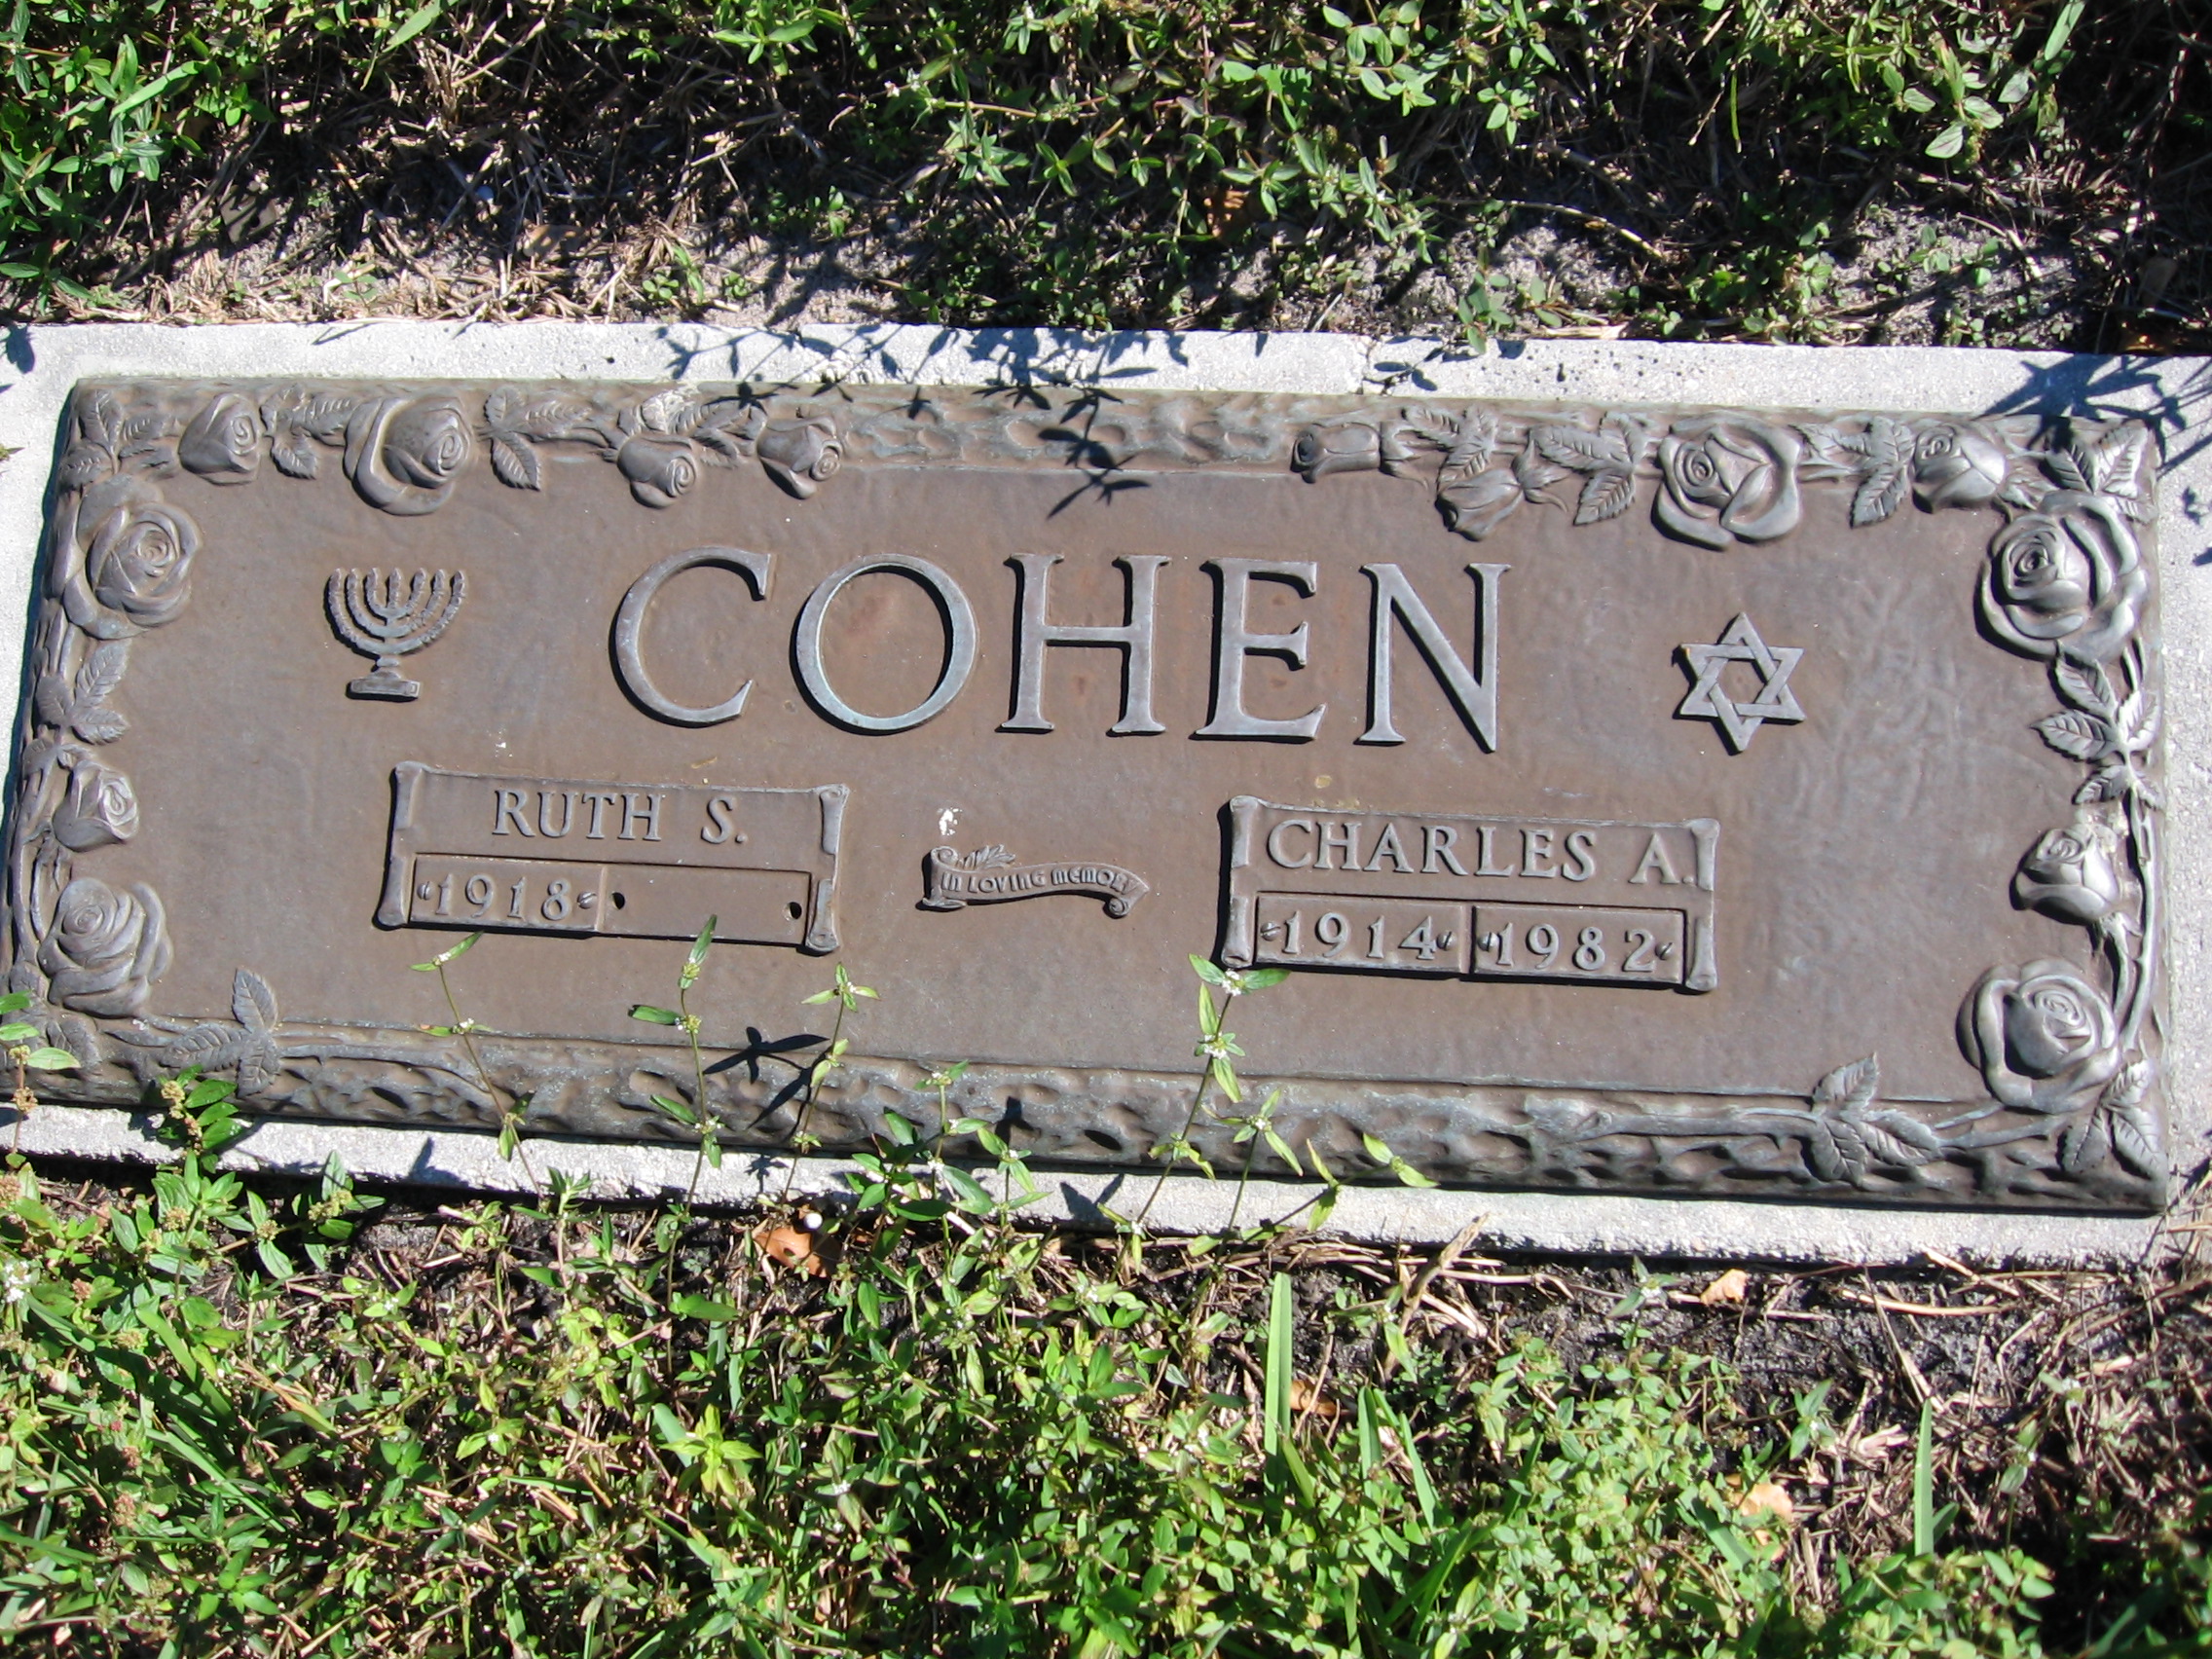 Charles A Cohen